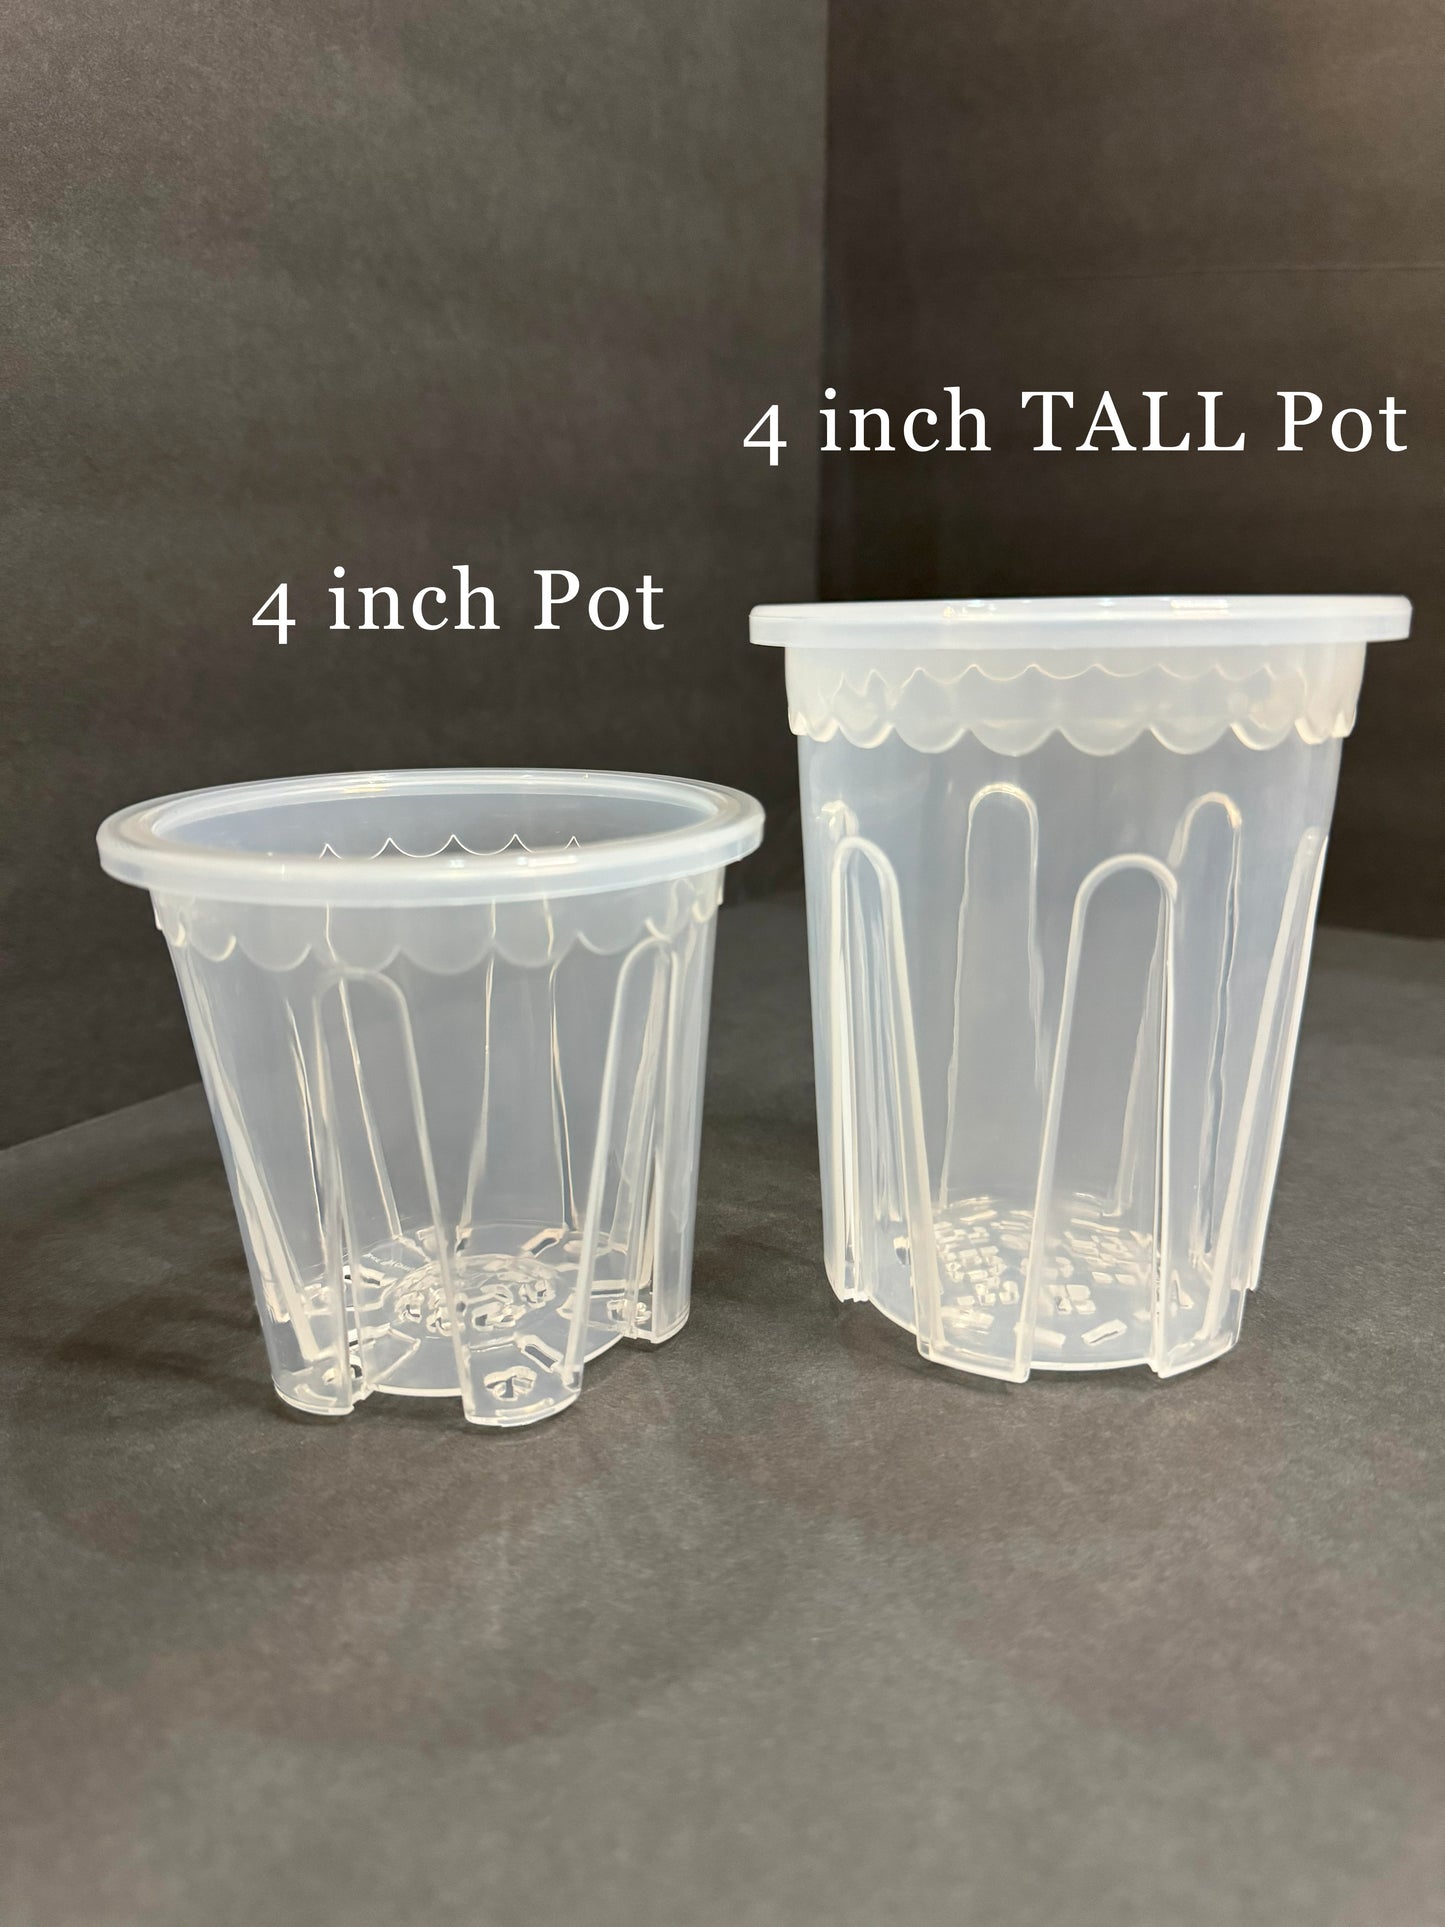 4 Inch Heavy Duty Round Clear Pot | Extra Firm Clear Round Small Pot | Extra Sturdy Clear TALL Pot